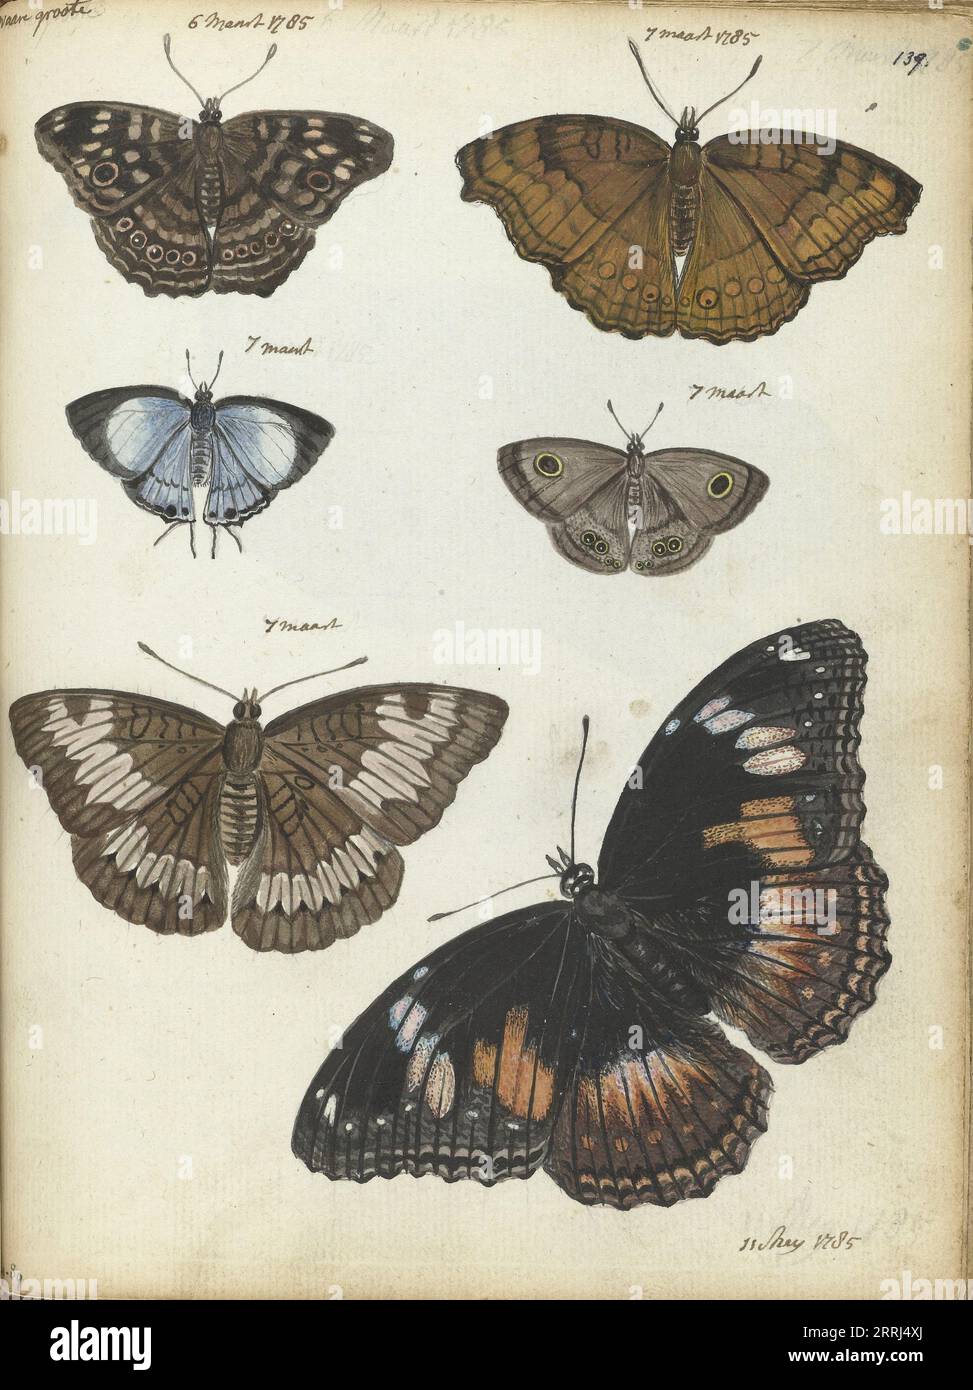 Butterflies from Java, 1785. Javanese butterflies and moths. With inscription. Part of Jan Brandes' sketchbook, dl. 1 (1808), p. 139. Stock Photo